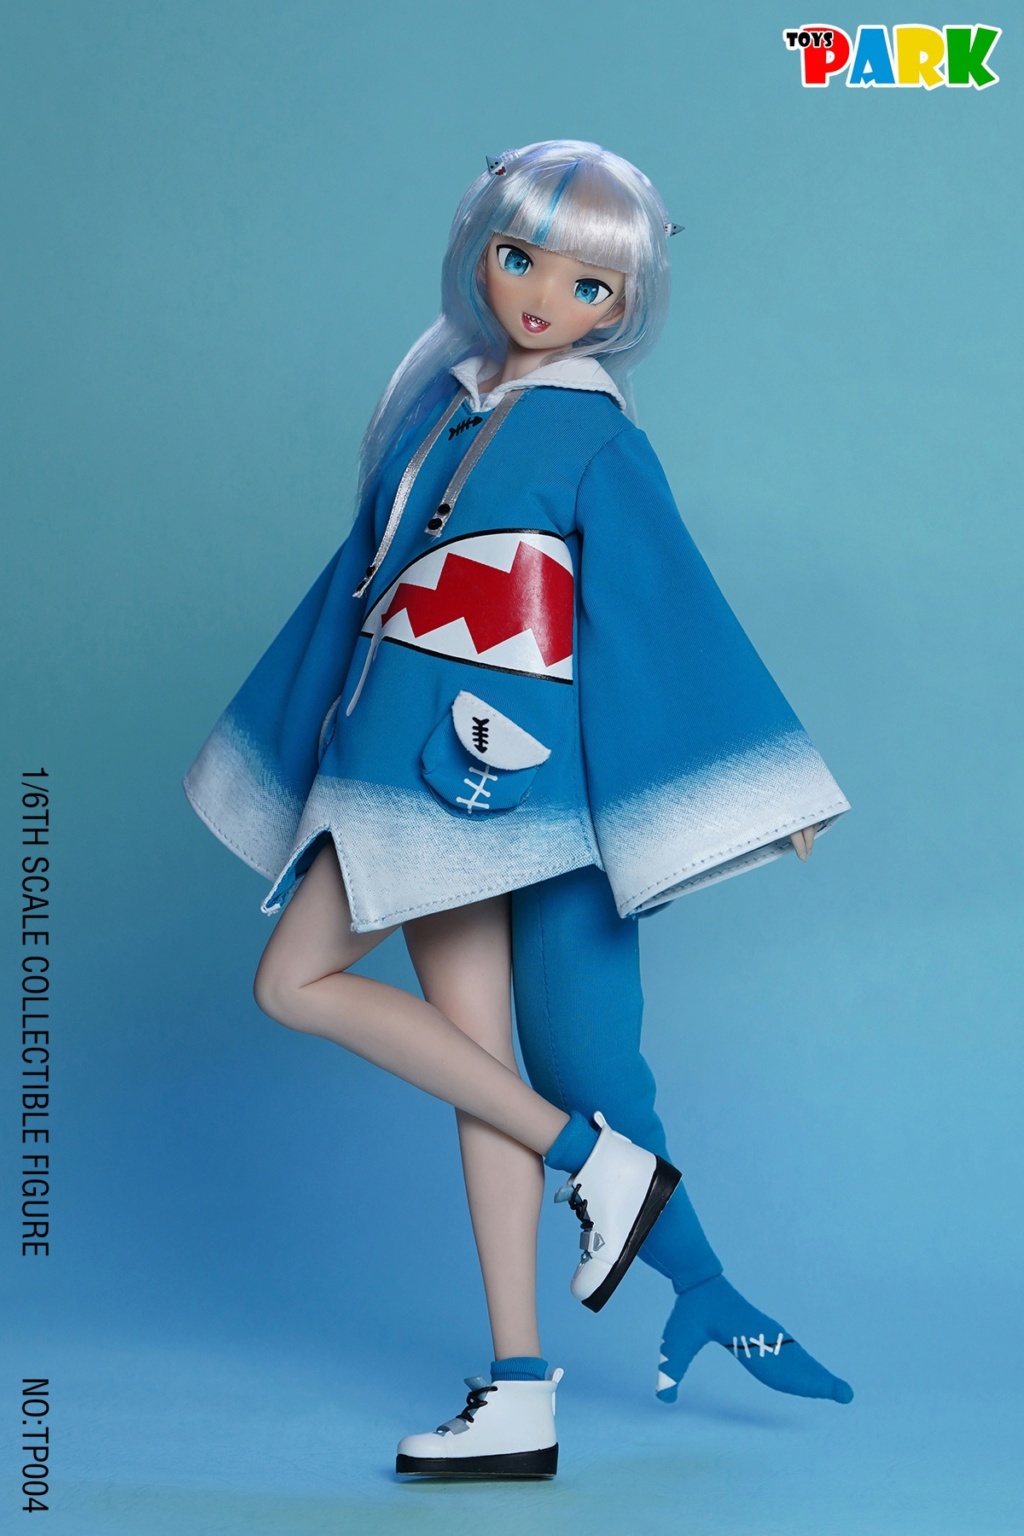 female - NEW PRODUCT: TOYS PARK: 1/6 Shark Girl Accessories Set #TP004 7e1a9510